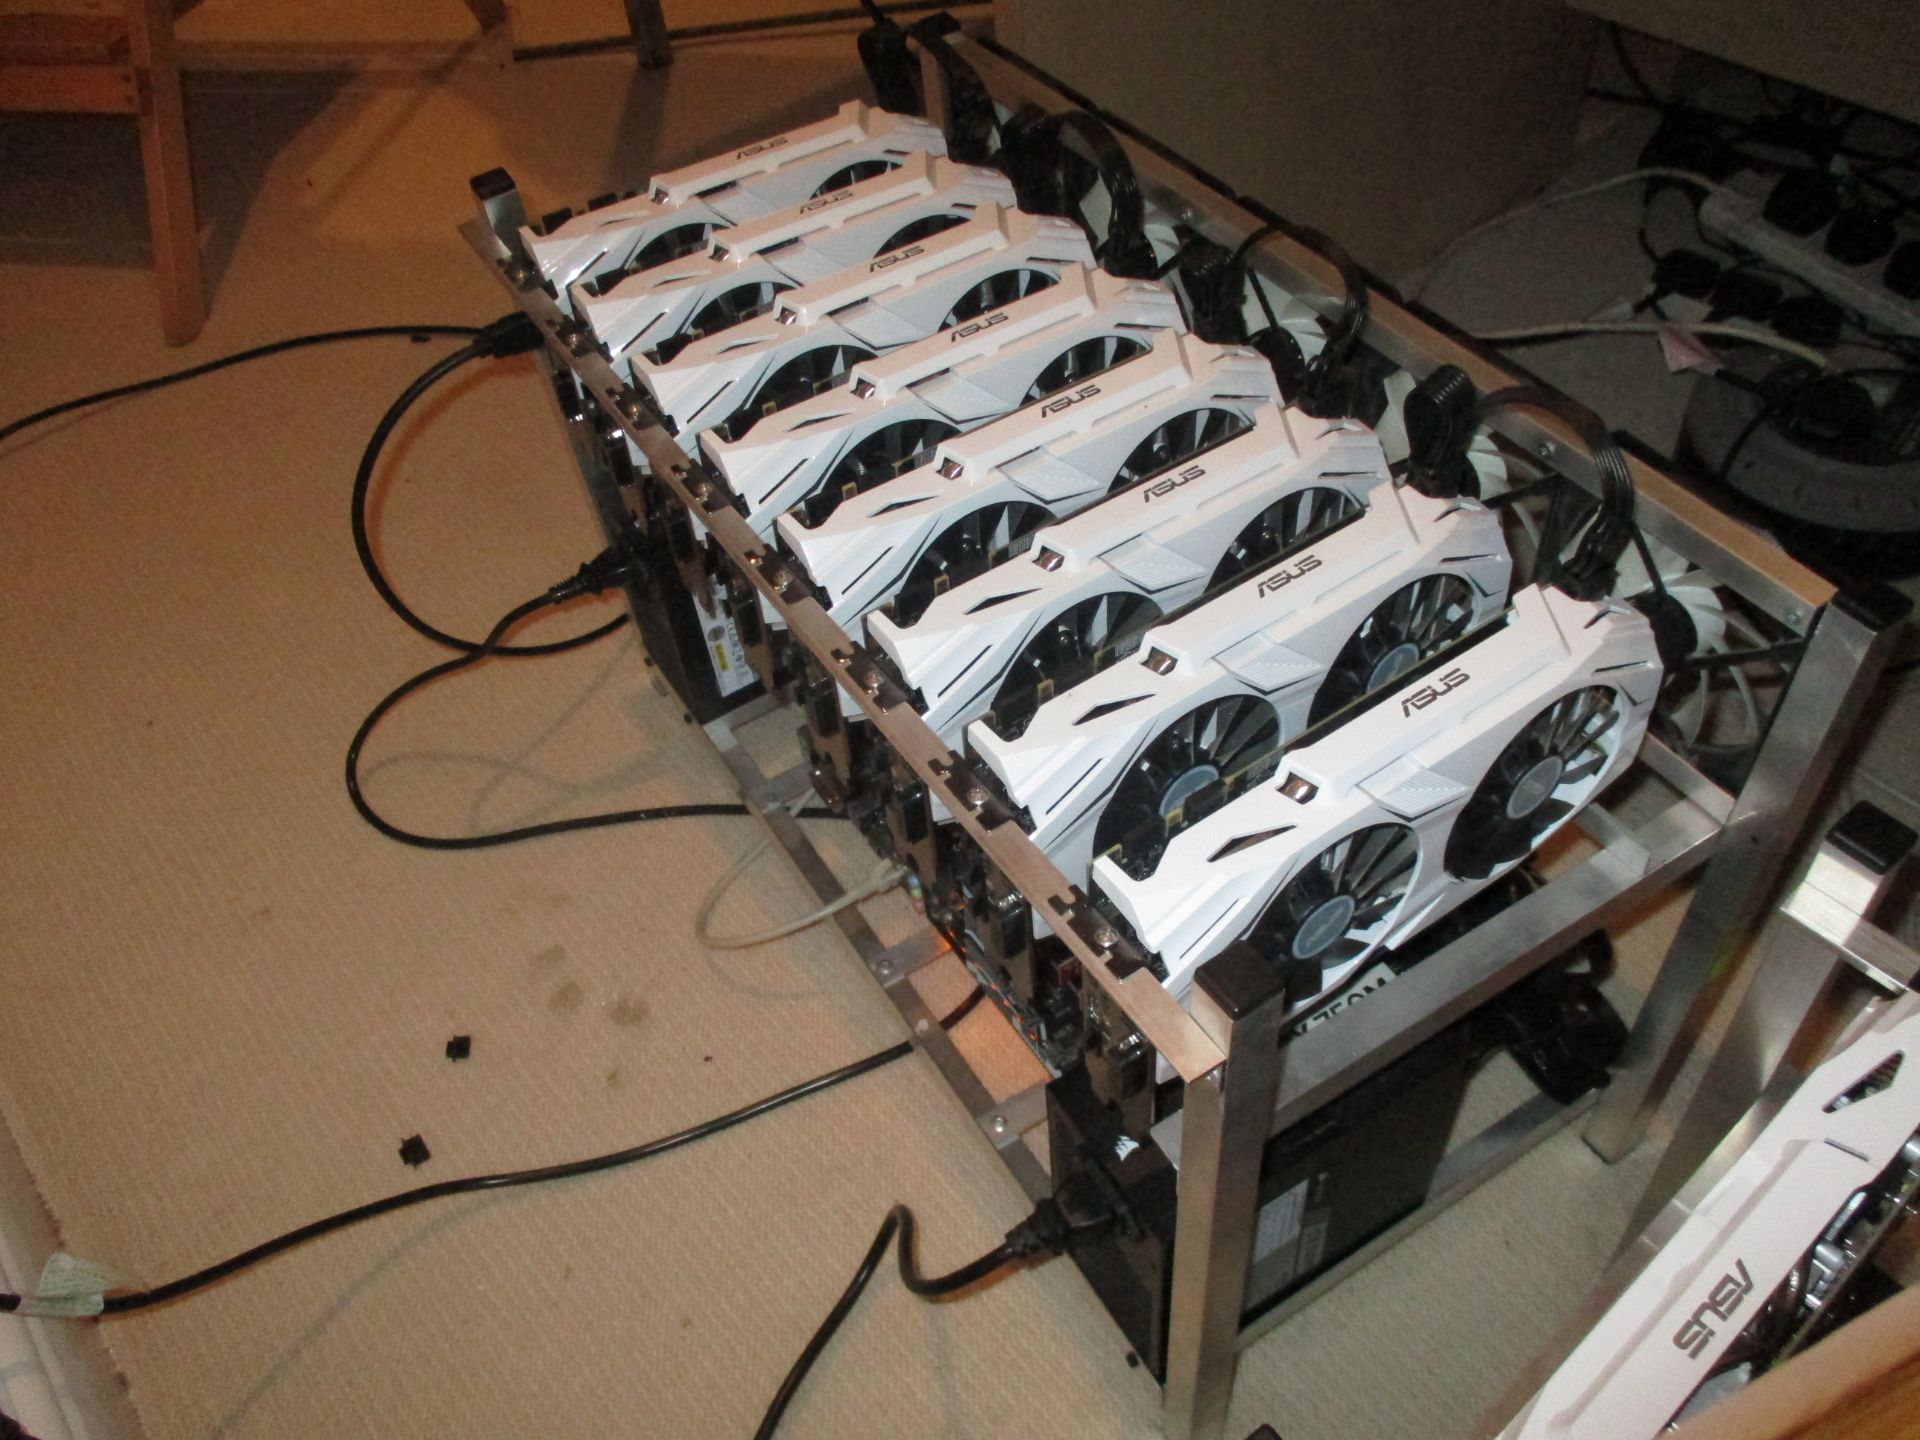 1 x Bit Coin/Crypto Currency Mining Rig With 8 x ASUS GTX1070 Graphics Cards